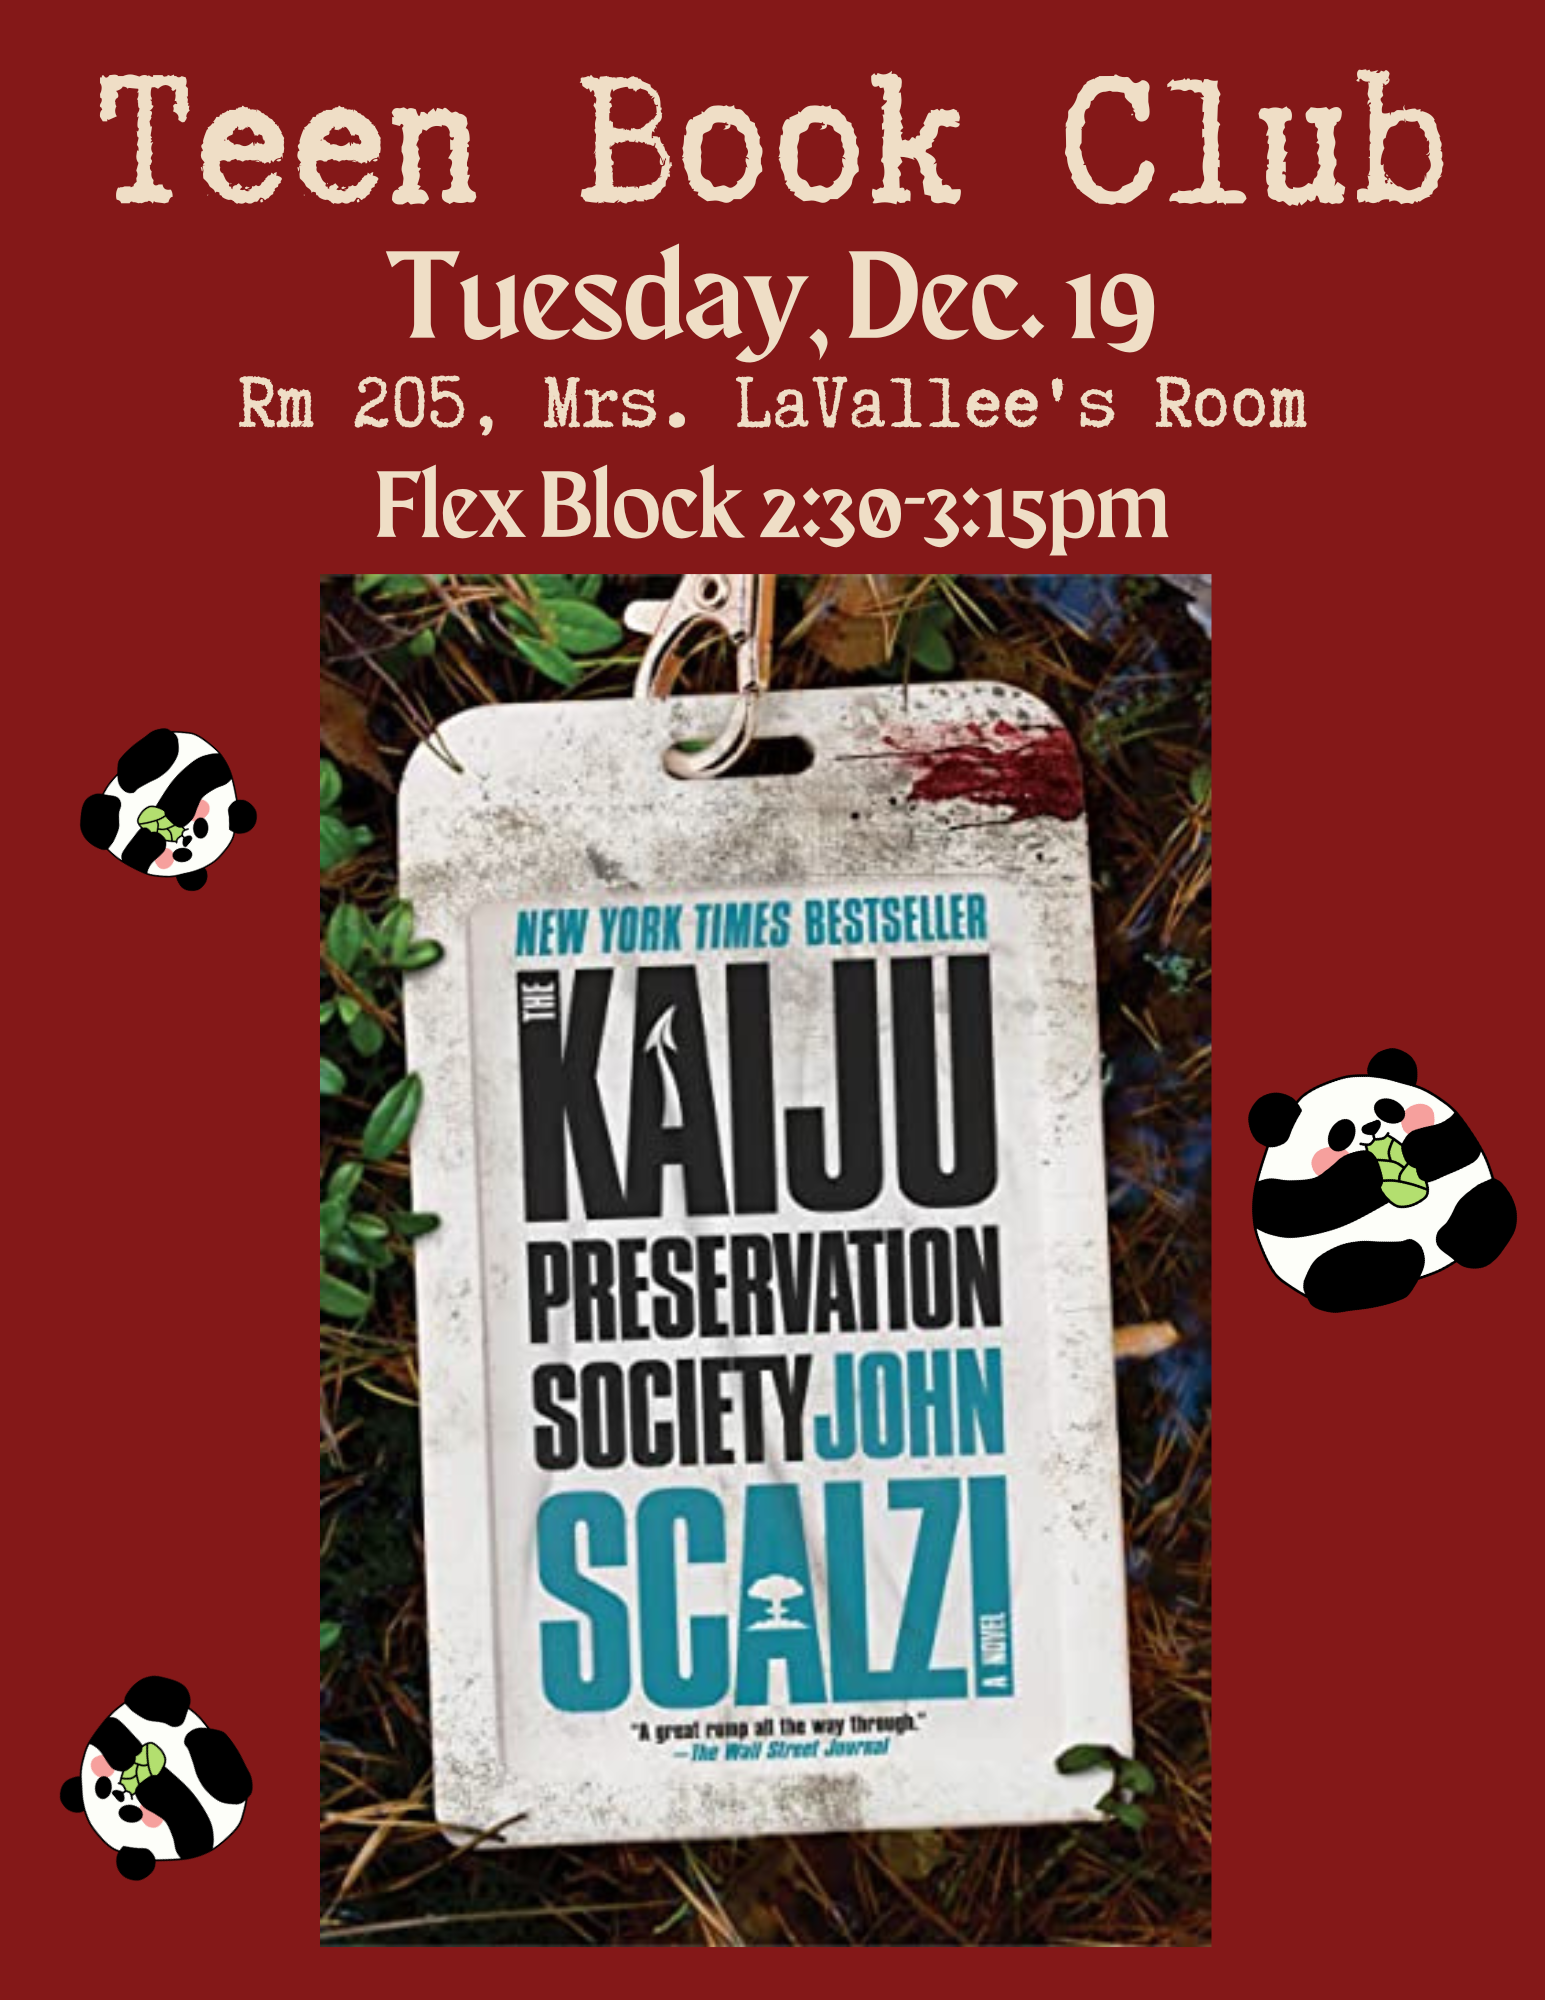 Graphic shows cover of the book "Kaiju Preservation Society" by John Scalzi and the event day/time/location: Tuesday, December 19 from 2:30pm to 3:15pm